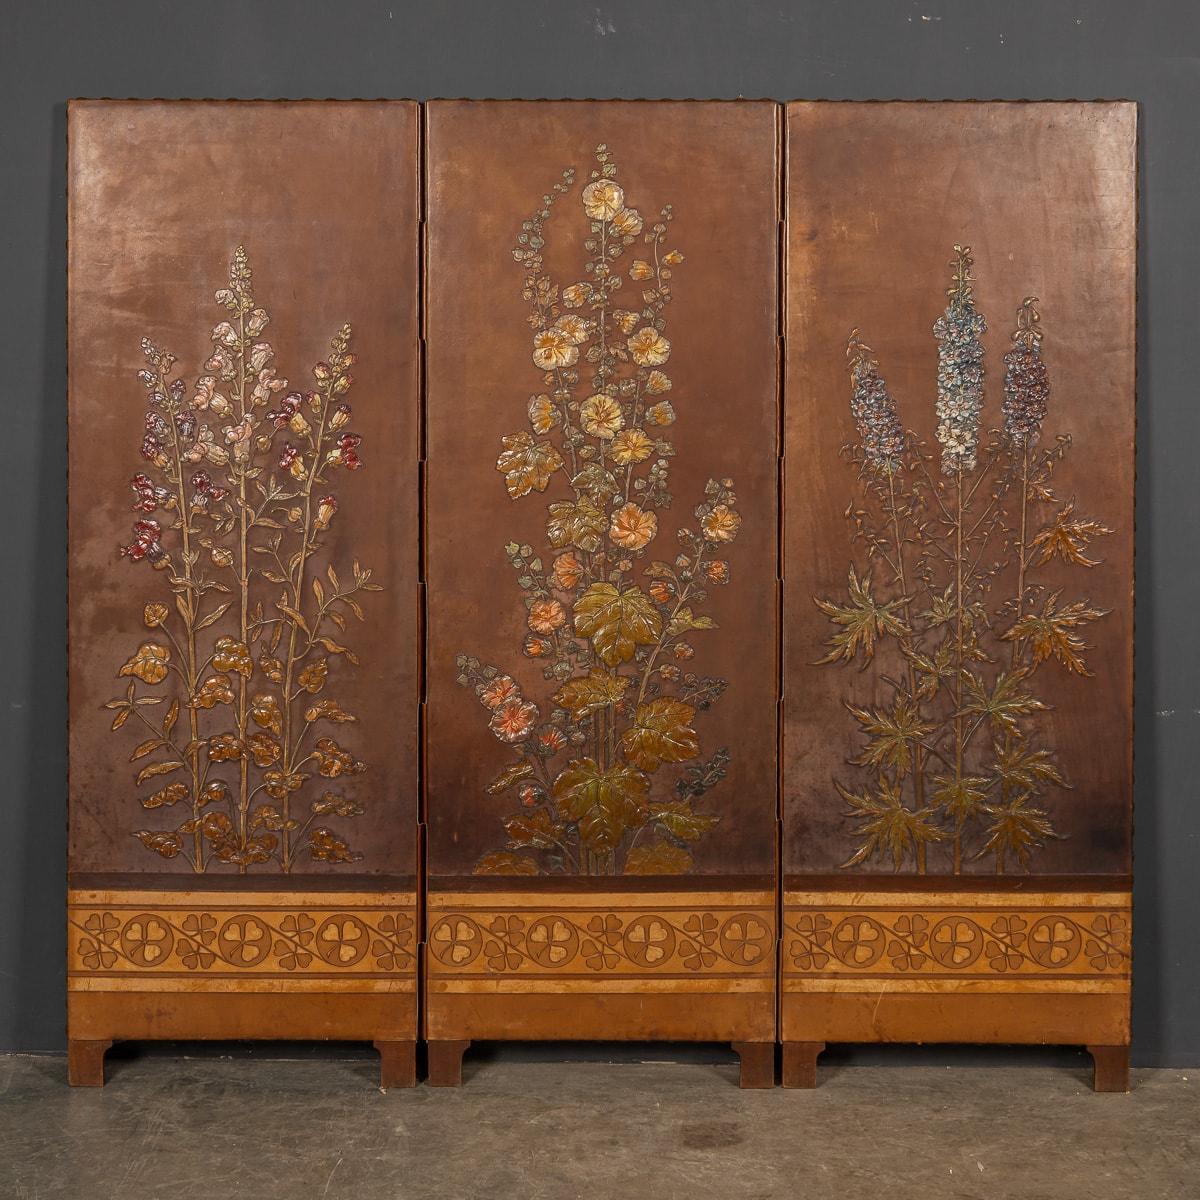 German 20th Century Oil Painted On Leather Room Screen, c.1920